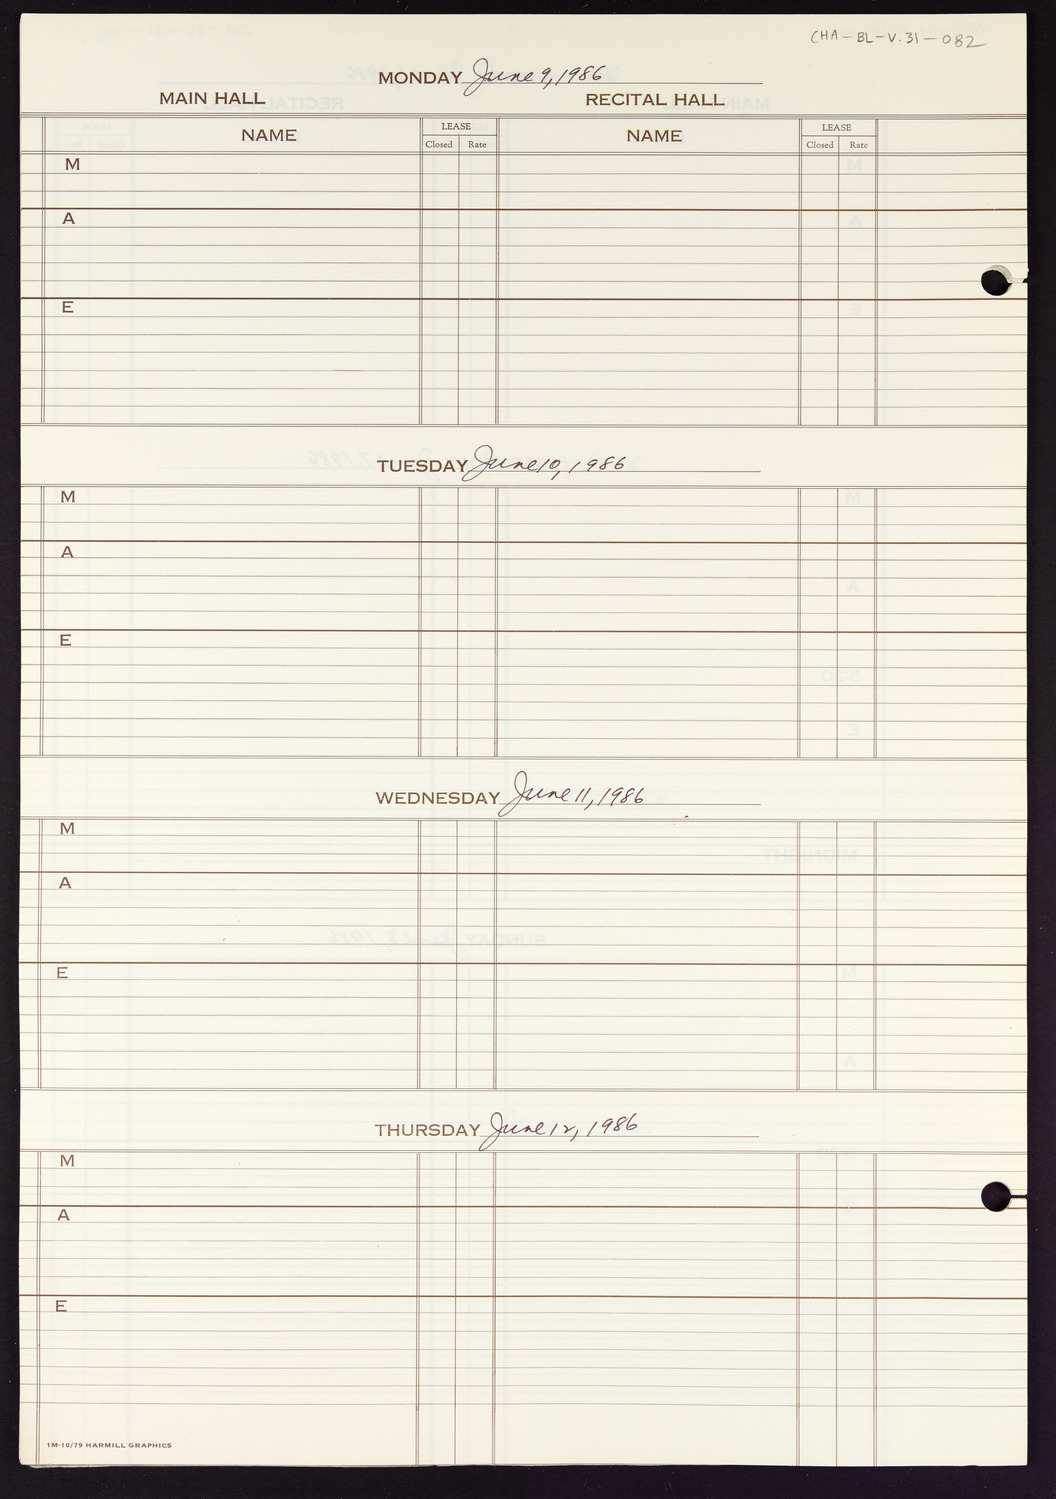 Carnegie Hall Booking Ledger, volume 31, page 82